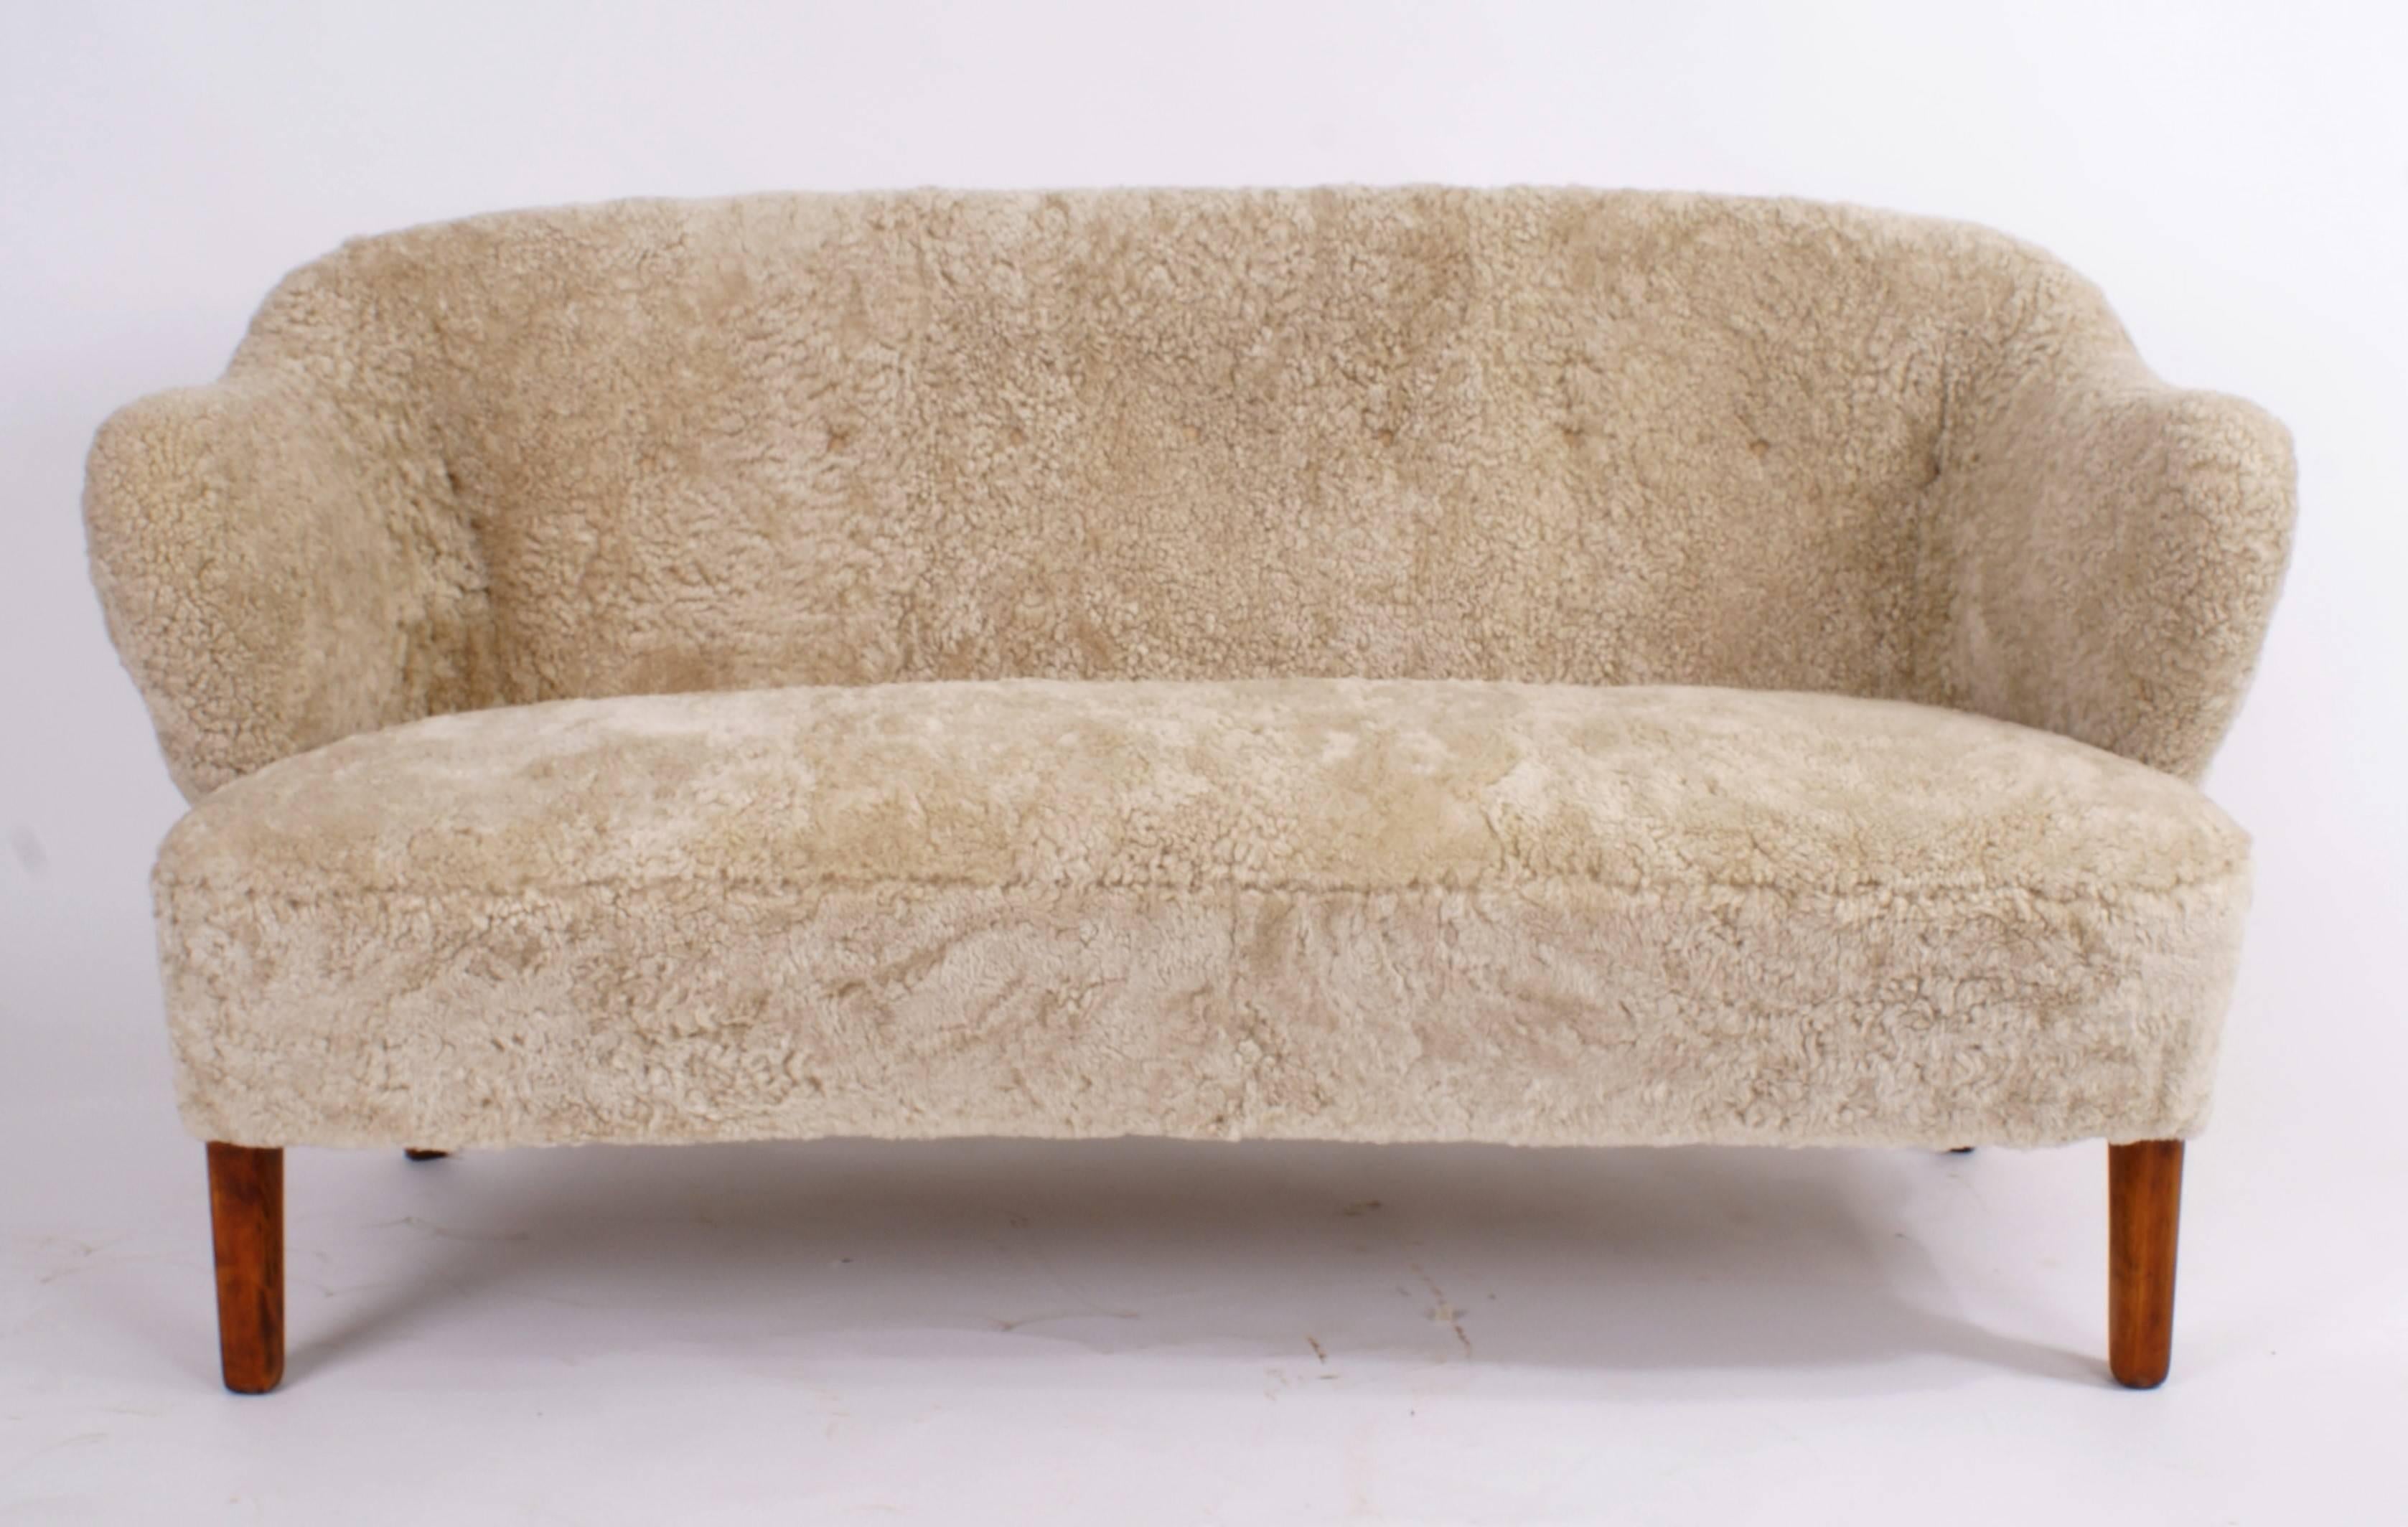 Flemming Lassen, two-seat settee for master cabinetmaker Jacob Kjær, Copenhagen. Beige sheepskin upholstery and ash legs. Designed 1940.

Please view 1stdibs item reference number LU1081215065911 for a pair of Flemming Lassen easy chairs that